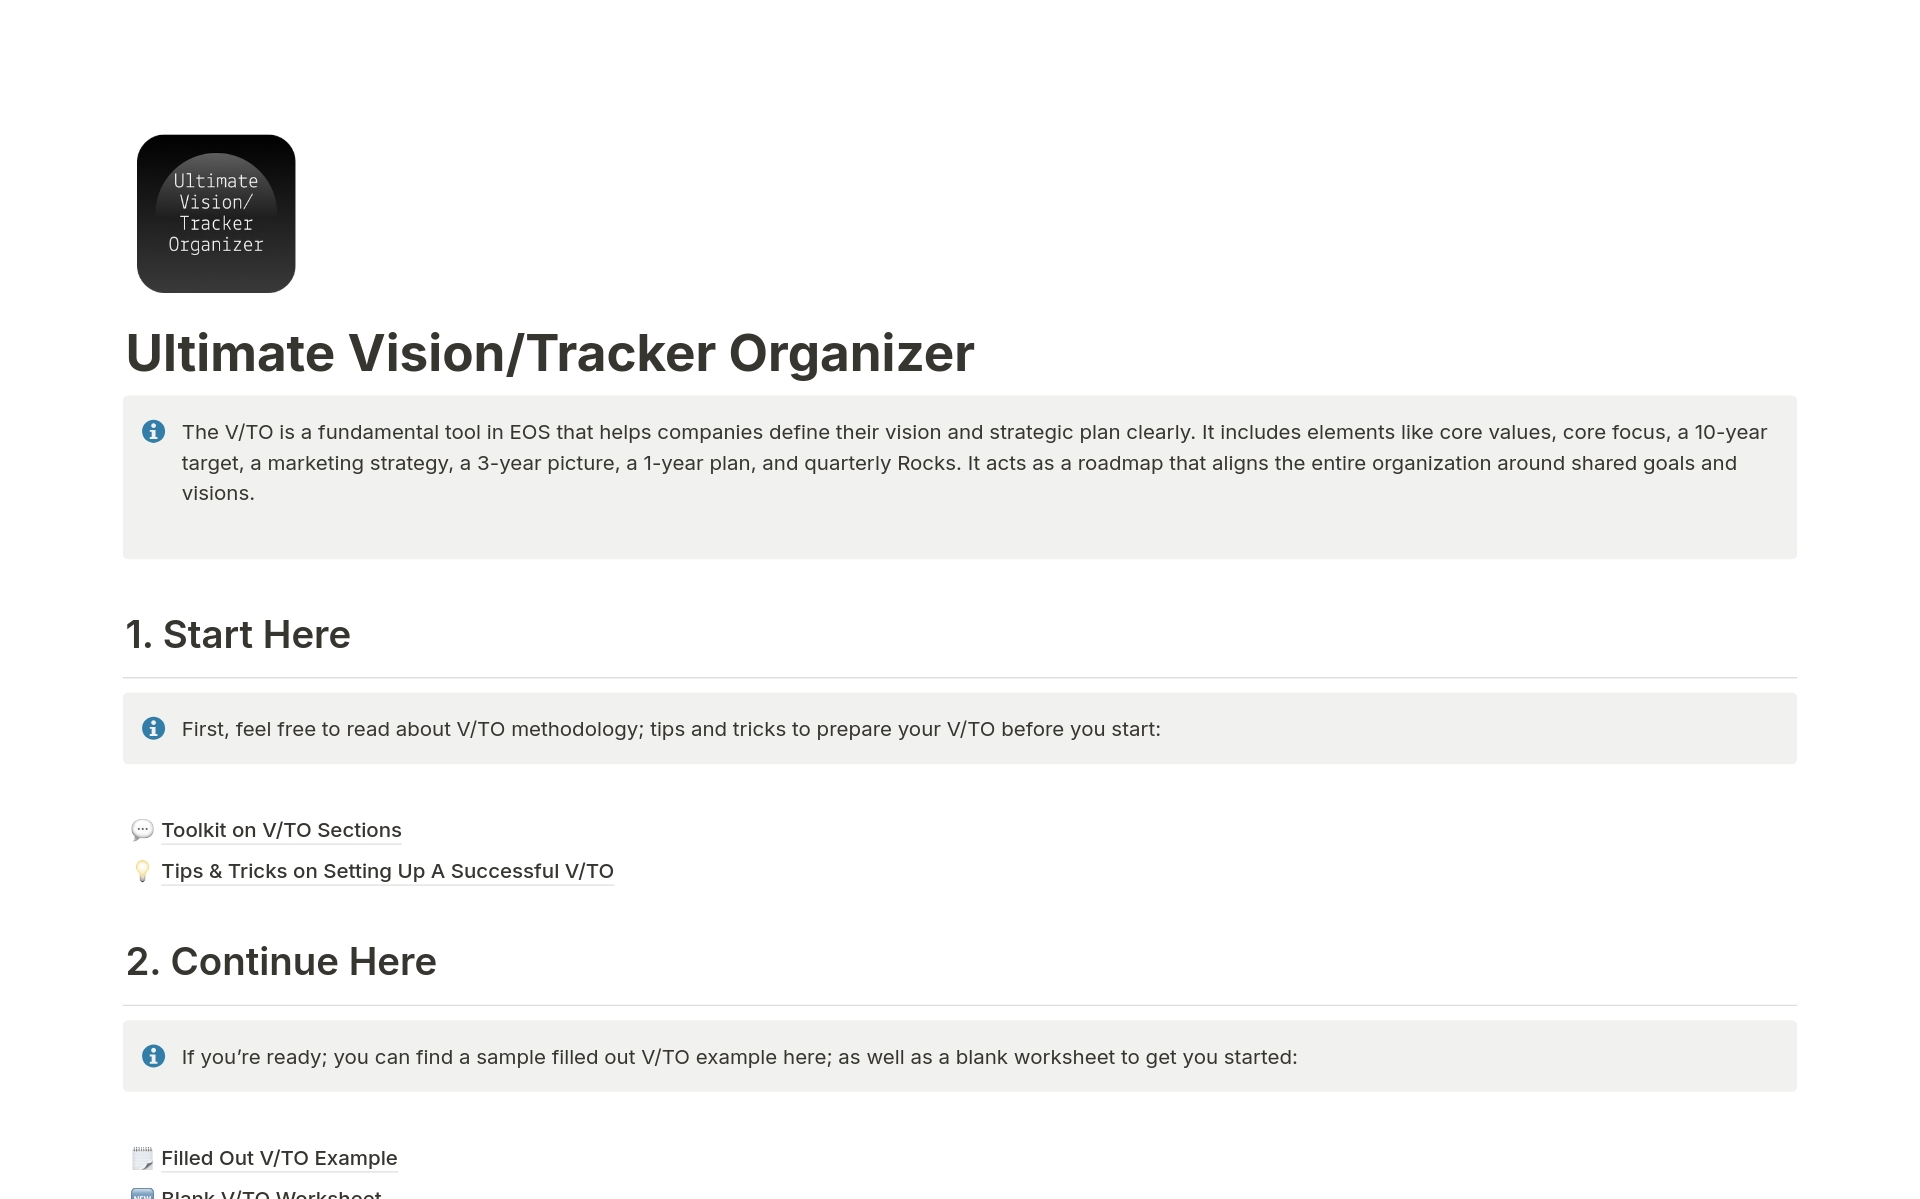 Ultimate Vision/Tracker Organizer is a Notion toolkit designed to streamline strategic planning in line with EOS principles, helping define and achieve long-term business goals while ensuring team focus and commitment.